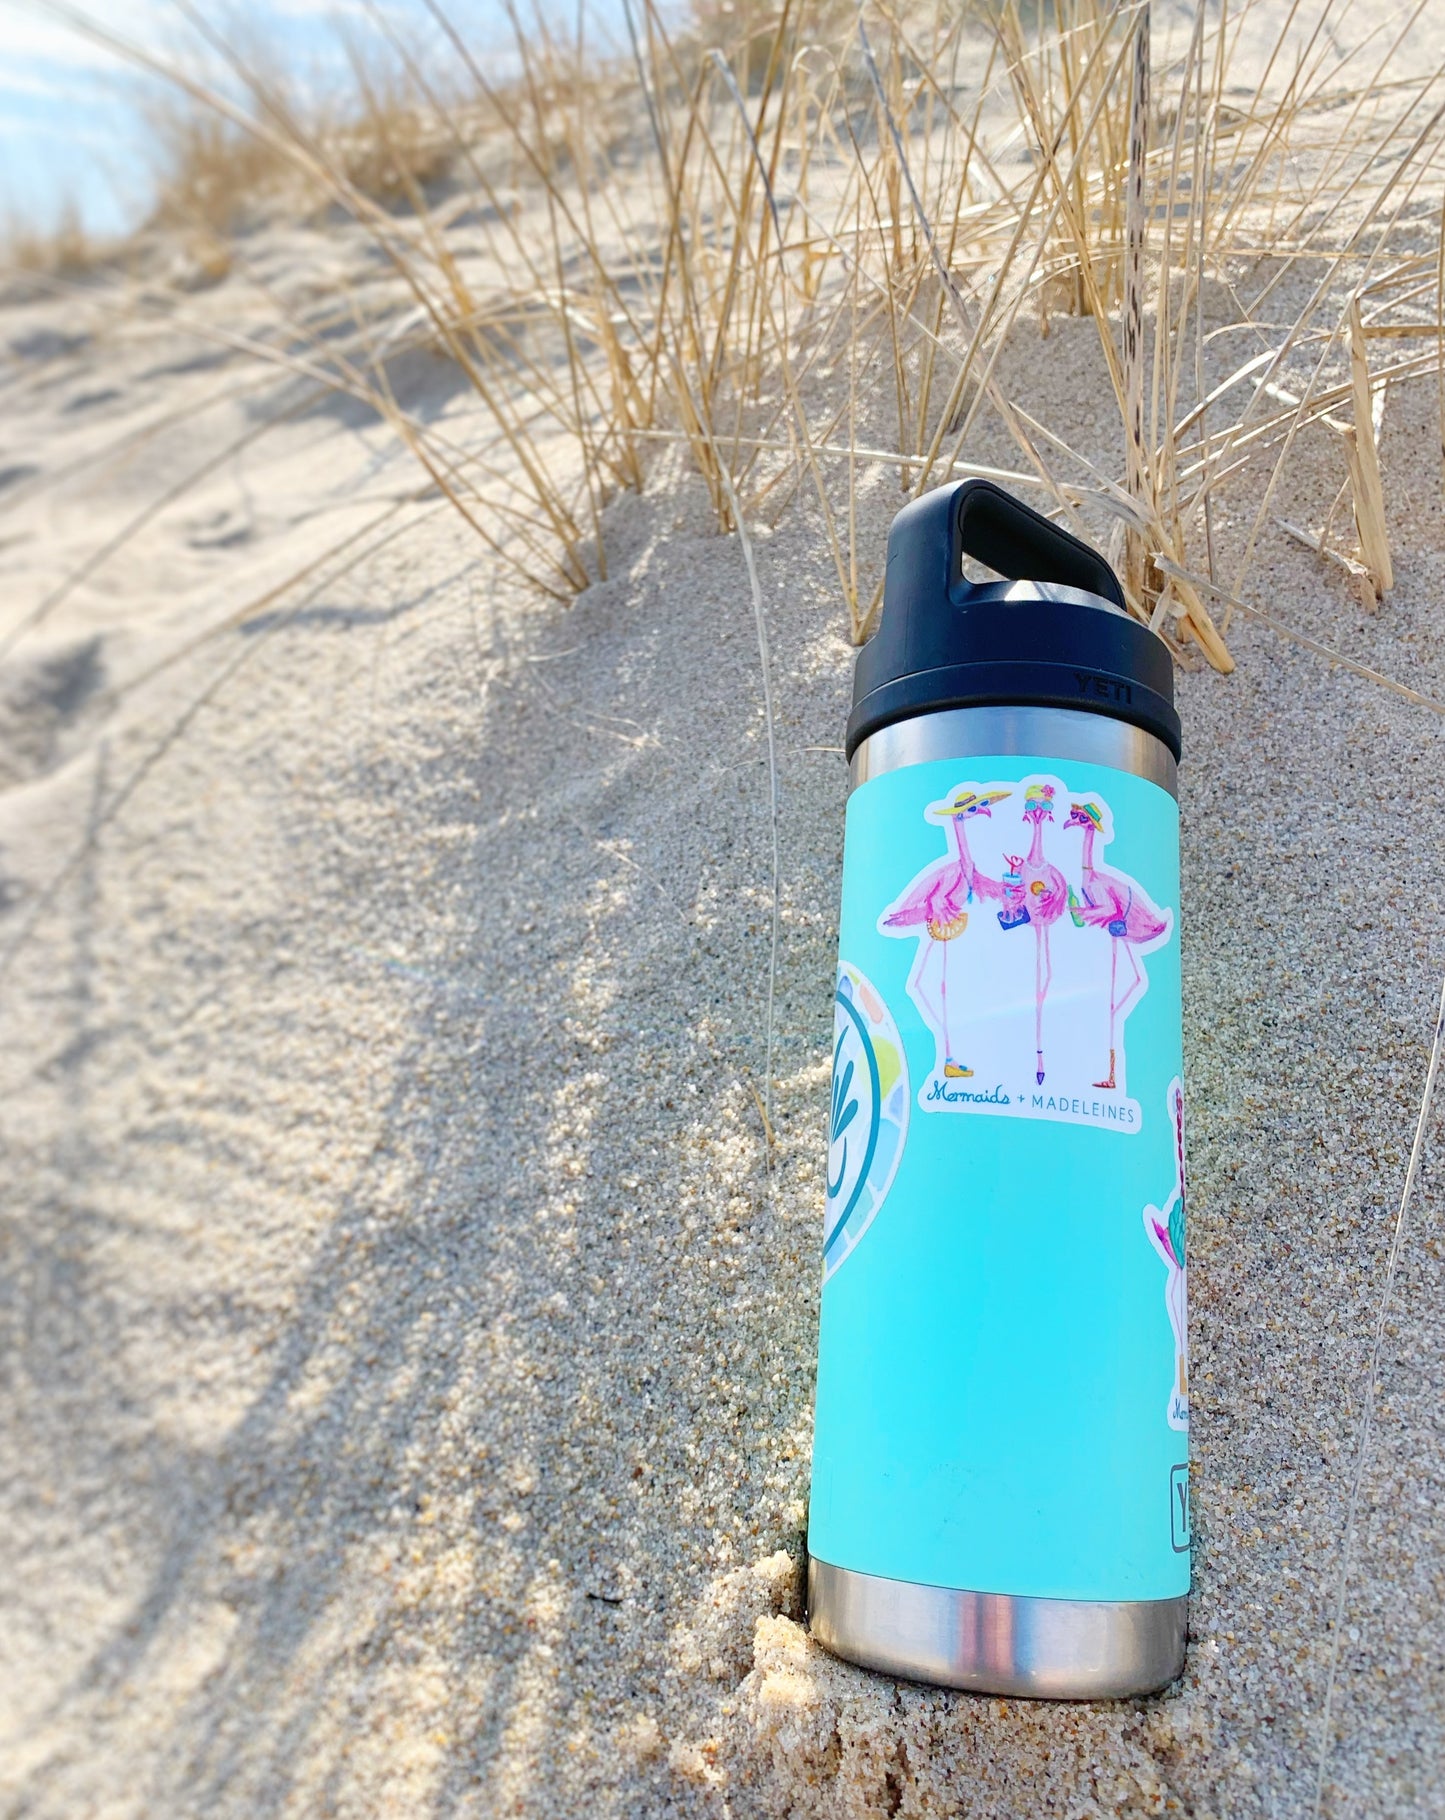 The flamingal sticker is created from original artwork made with acrylic paint and marker its 3 flamingo ladies dressed in summer hats and various footwear. This sticker is on a bright aqua Yeti thermos thats sitting in sand on the beach